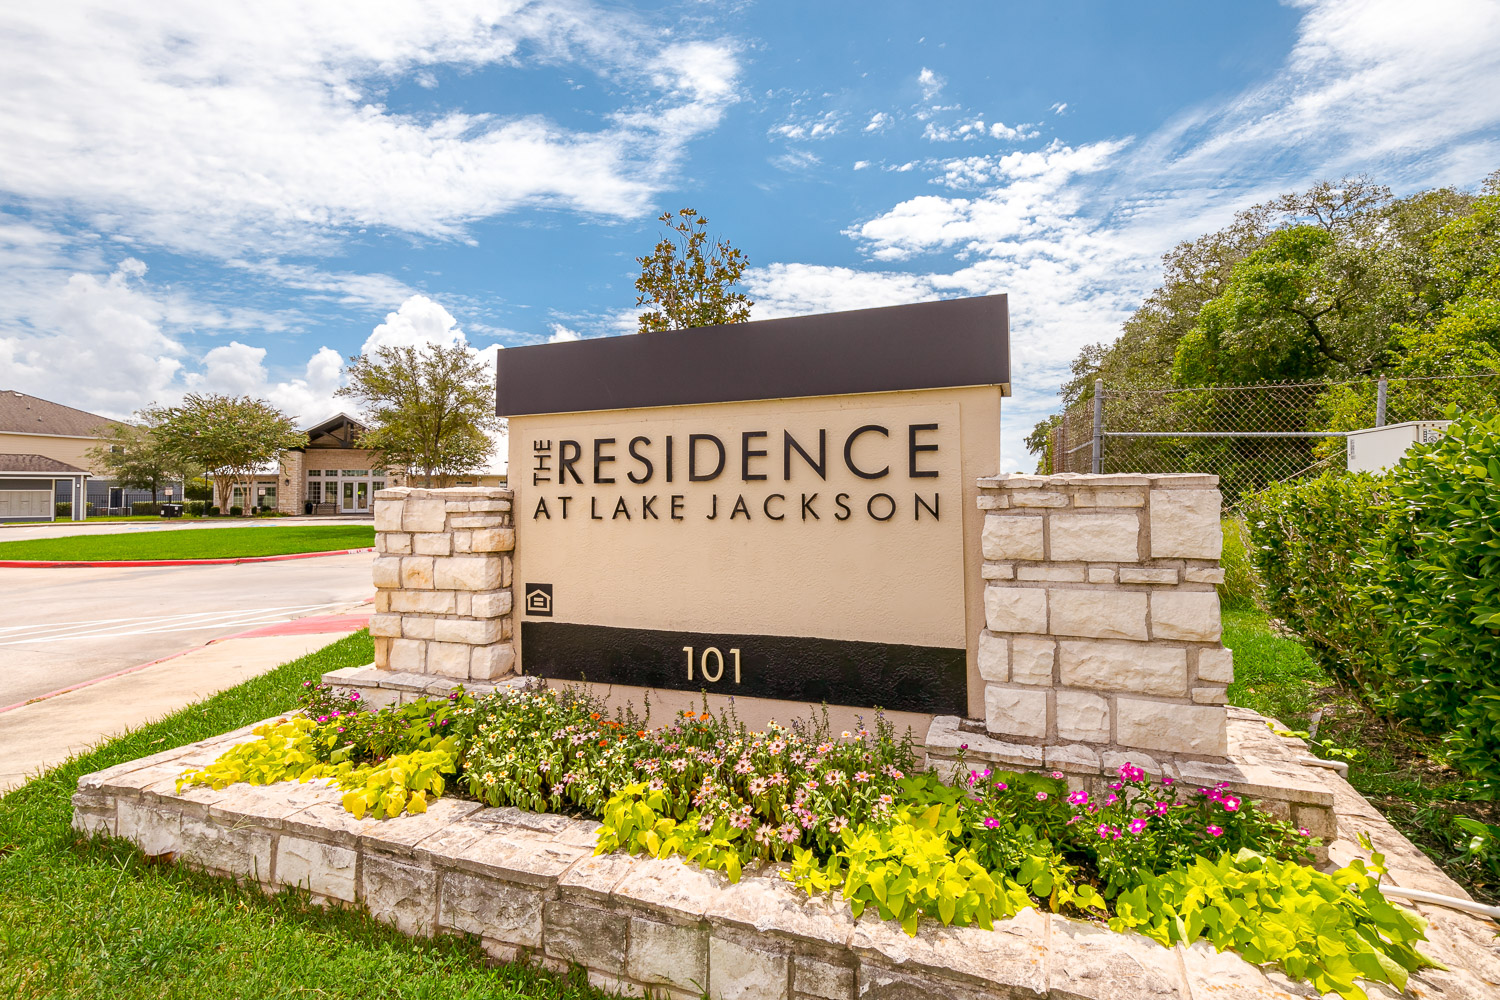 Lake Jackson Apartments, LLC Completes $29.6 Million Acquisition of the Residence at Lake Jackson in Texas